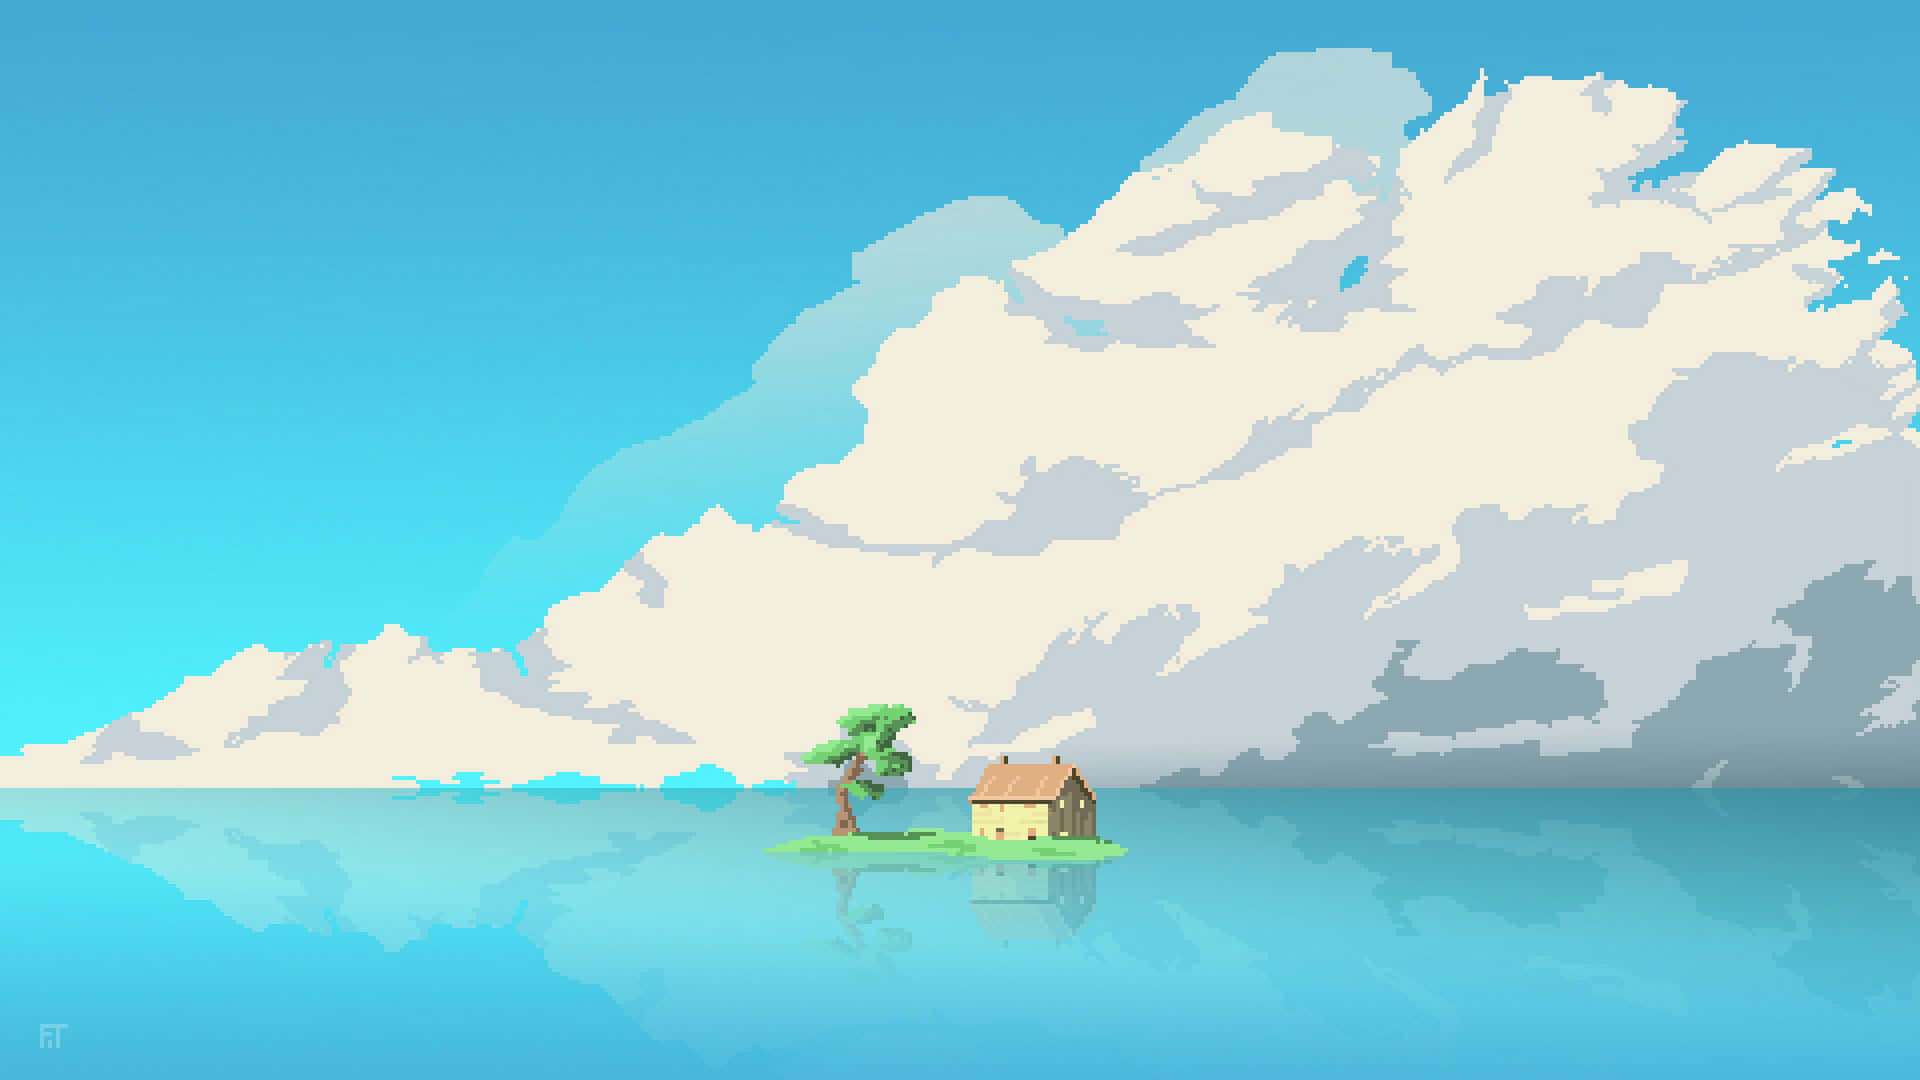 A House On A Small Island In The Water